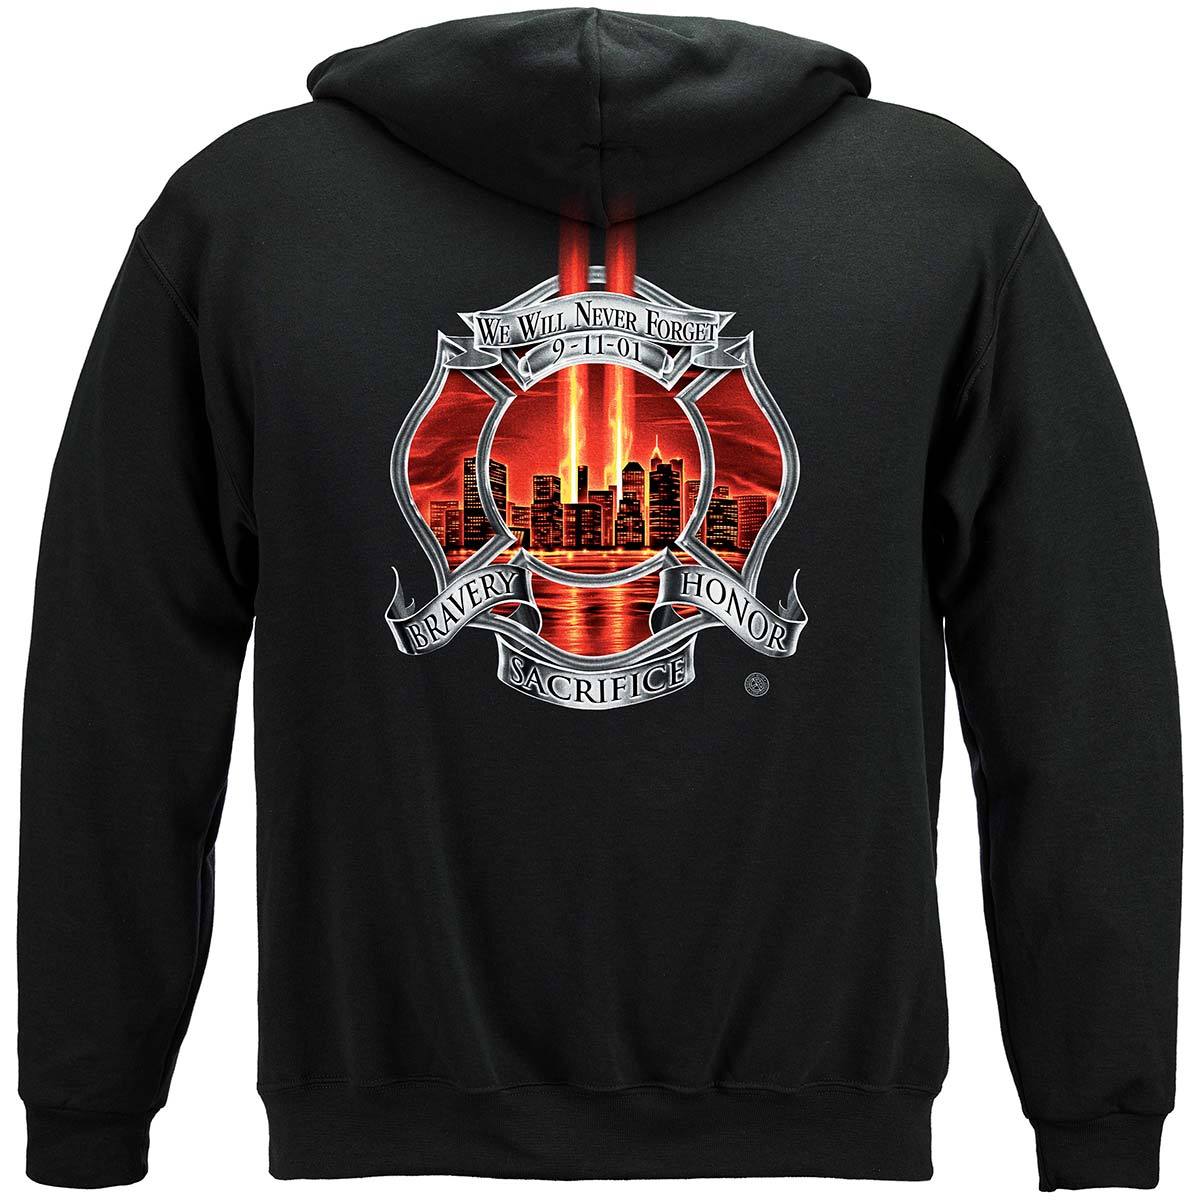 Red Tribute High Honor Firefighter Premium Long Sleeves